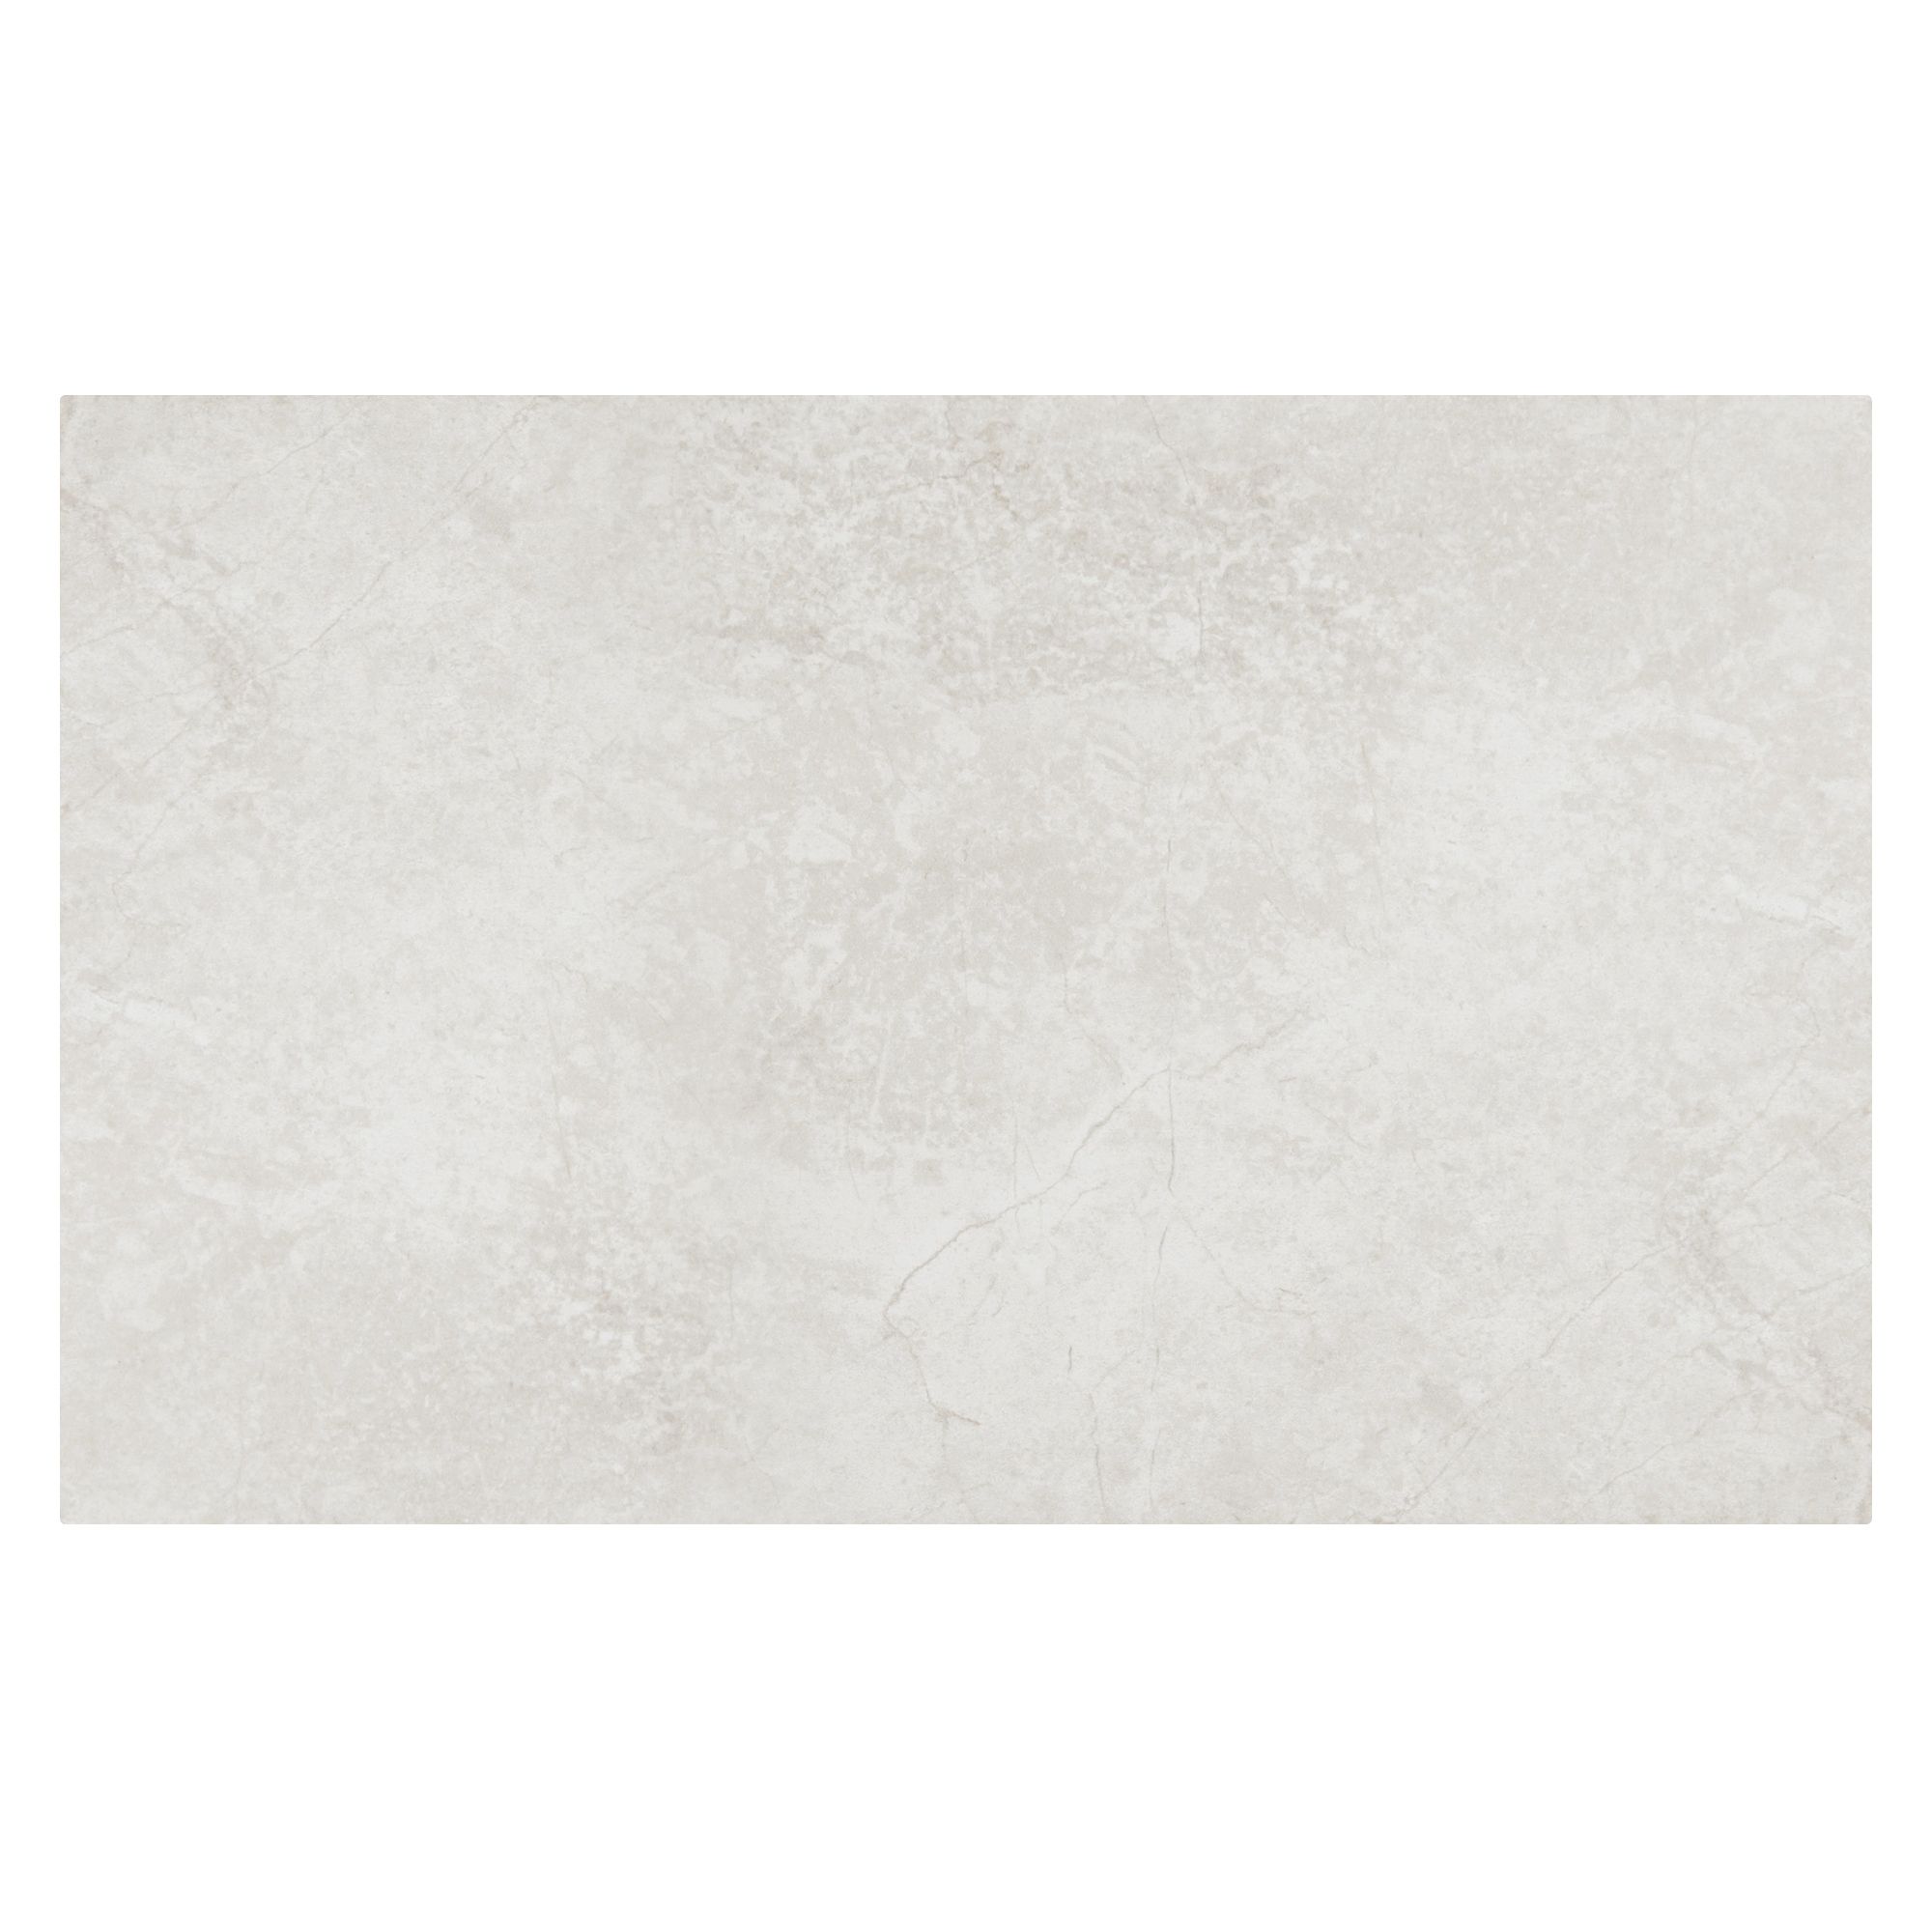 Commo White Gloss Flat Ceramic Indoor Wall Tile, Pack of 10, (L)402.4mm (W)251.6mm